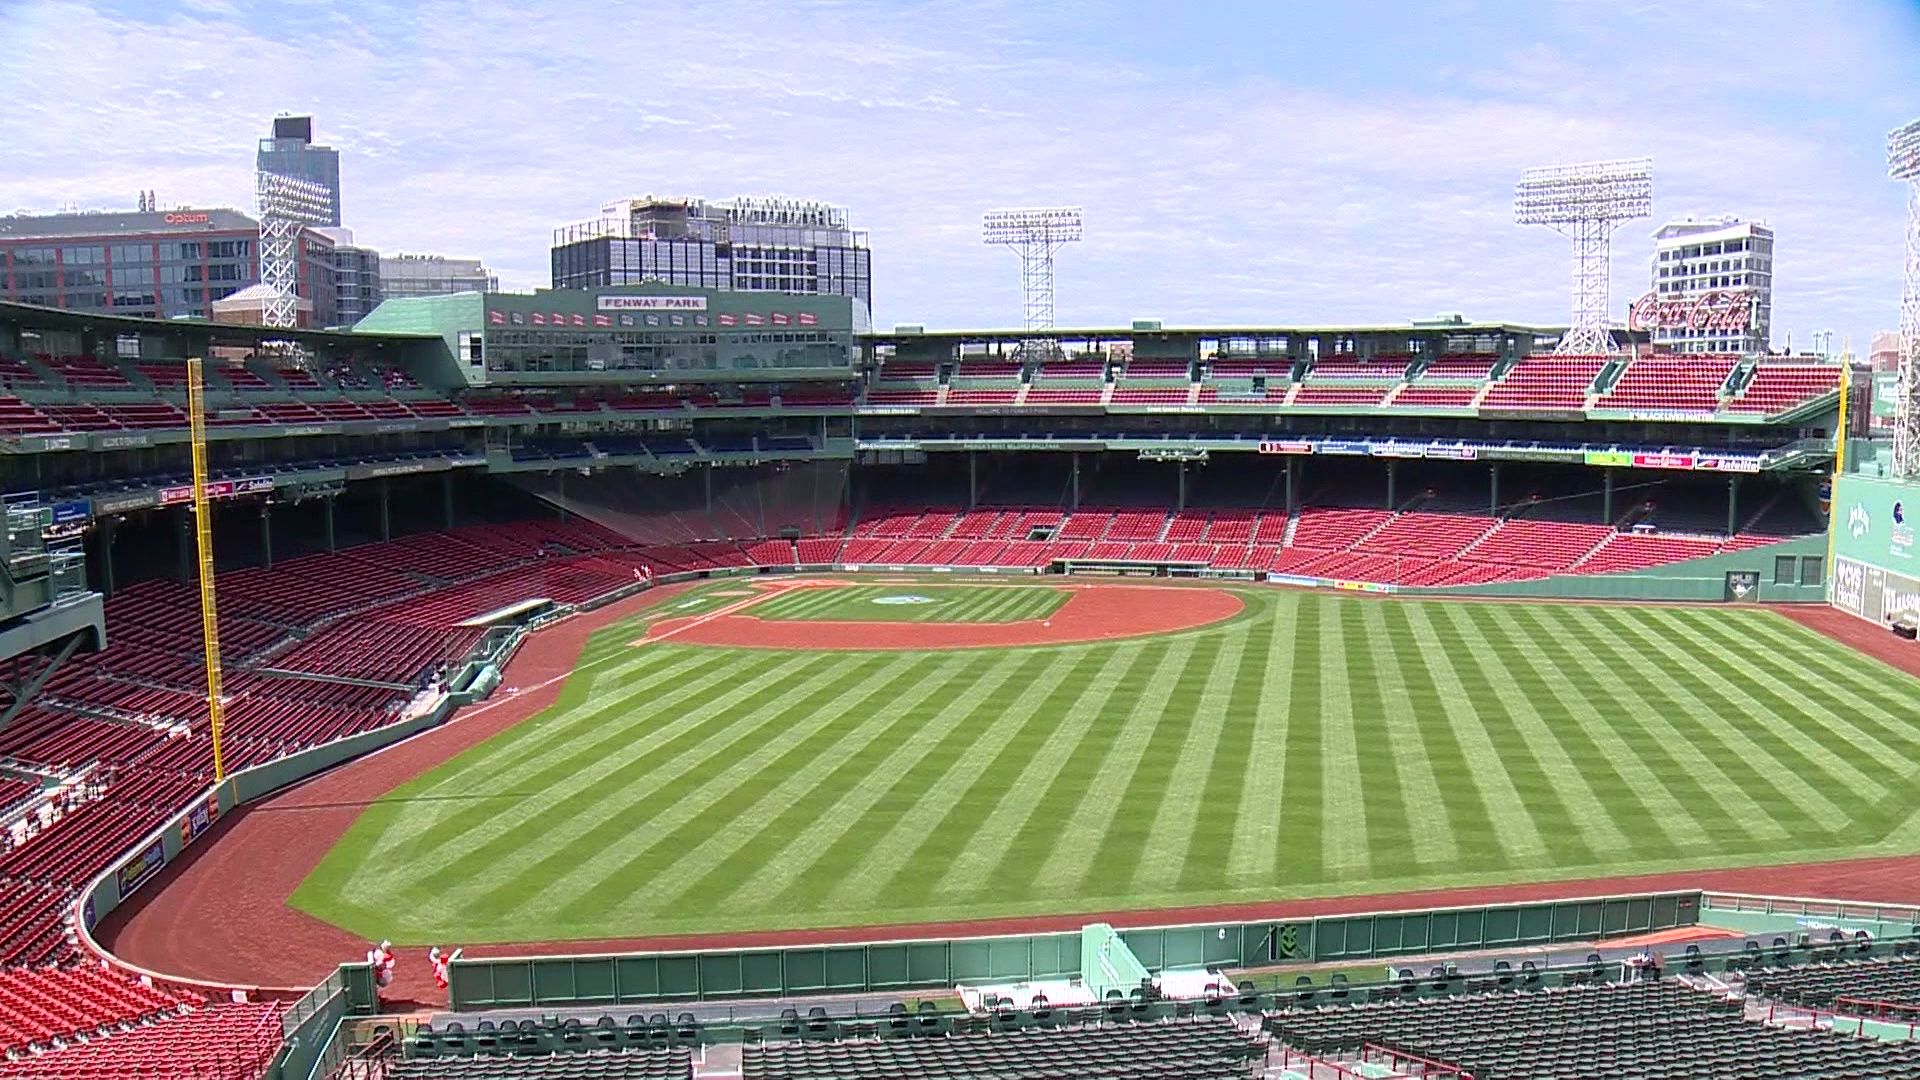 Fenway Park hosts watch party for Celtics in NBA Finals Game 6